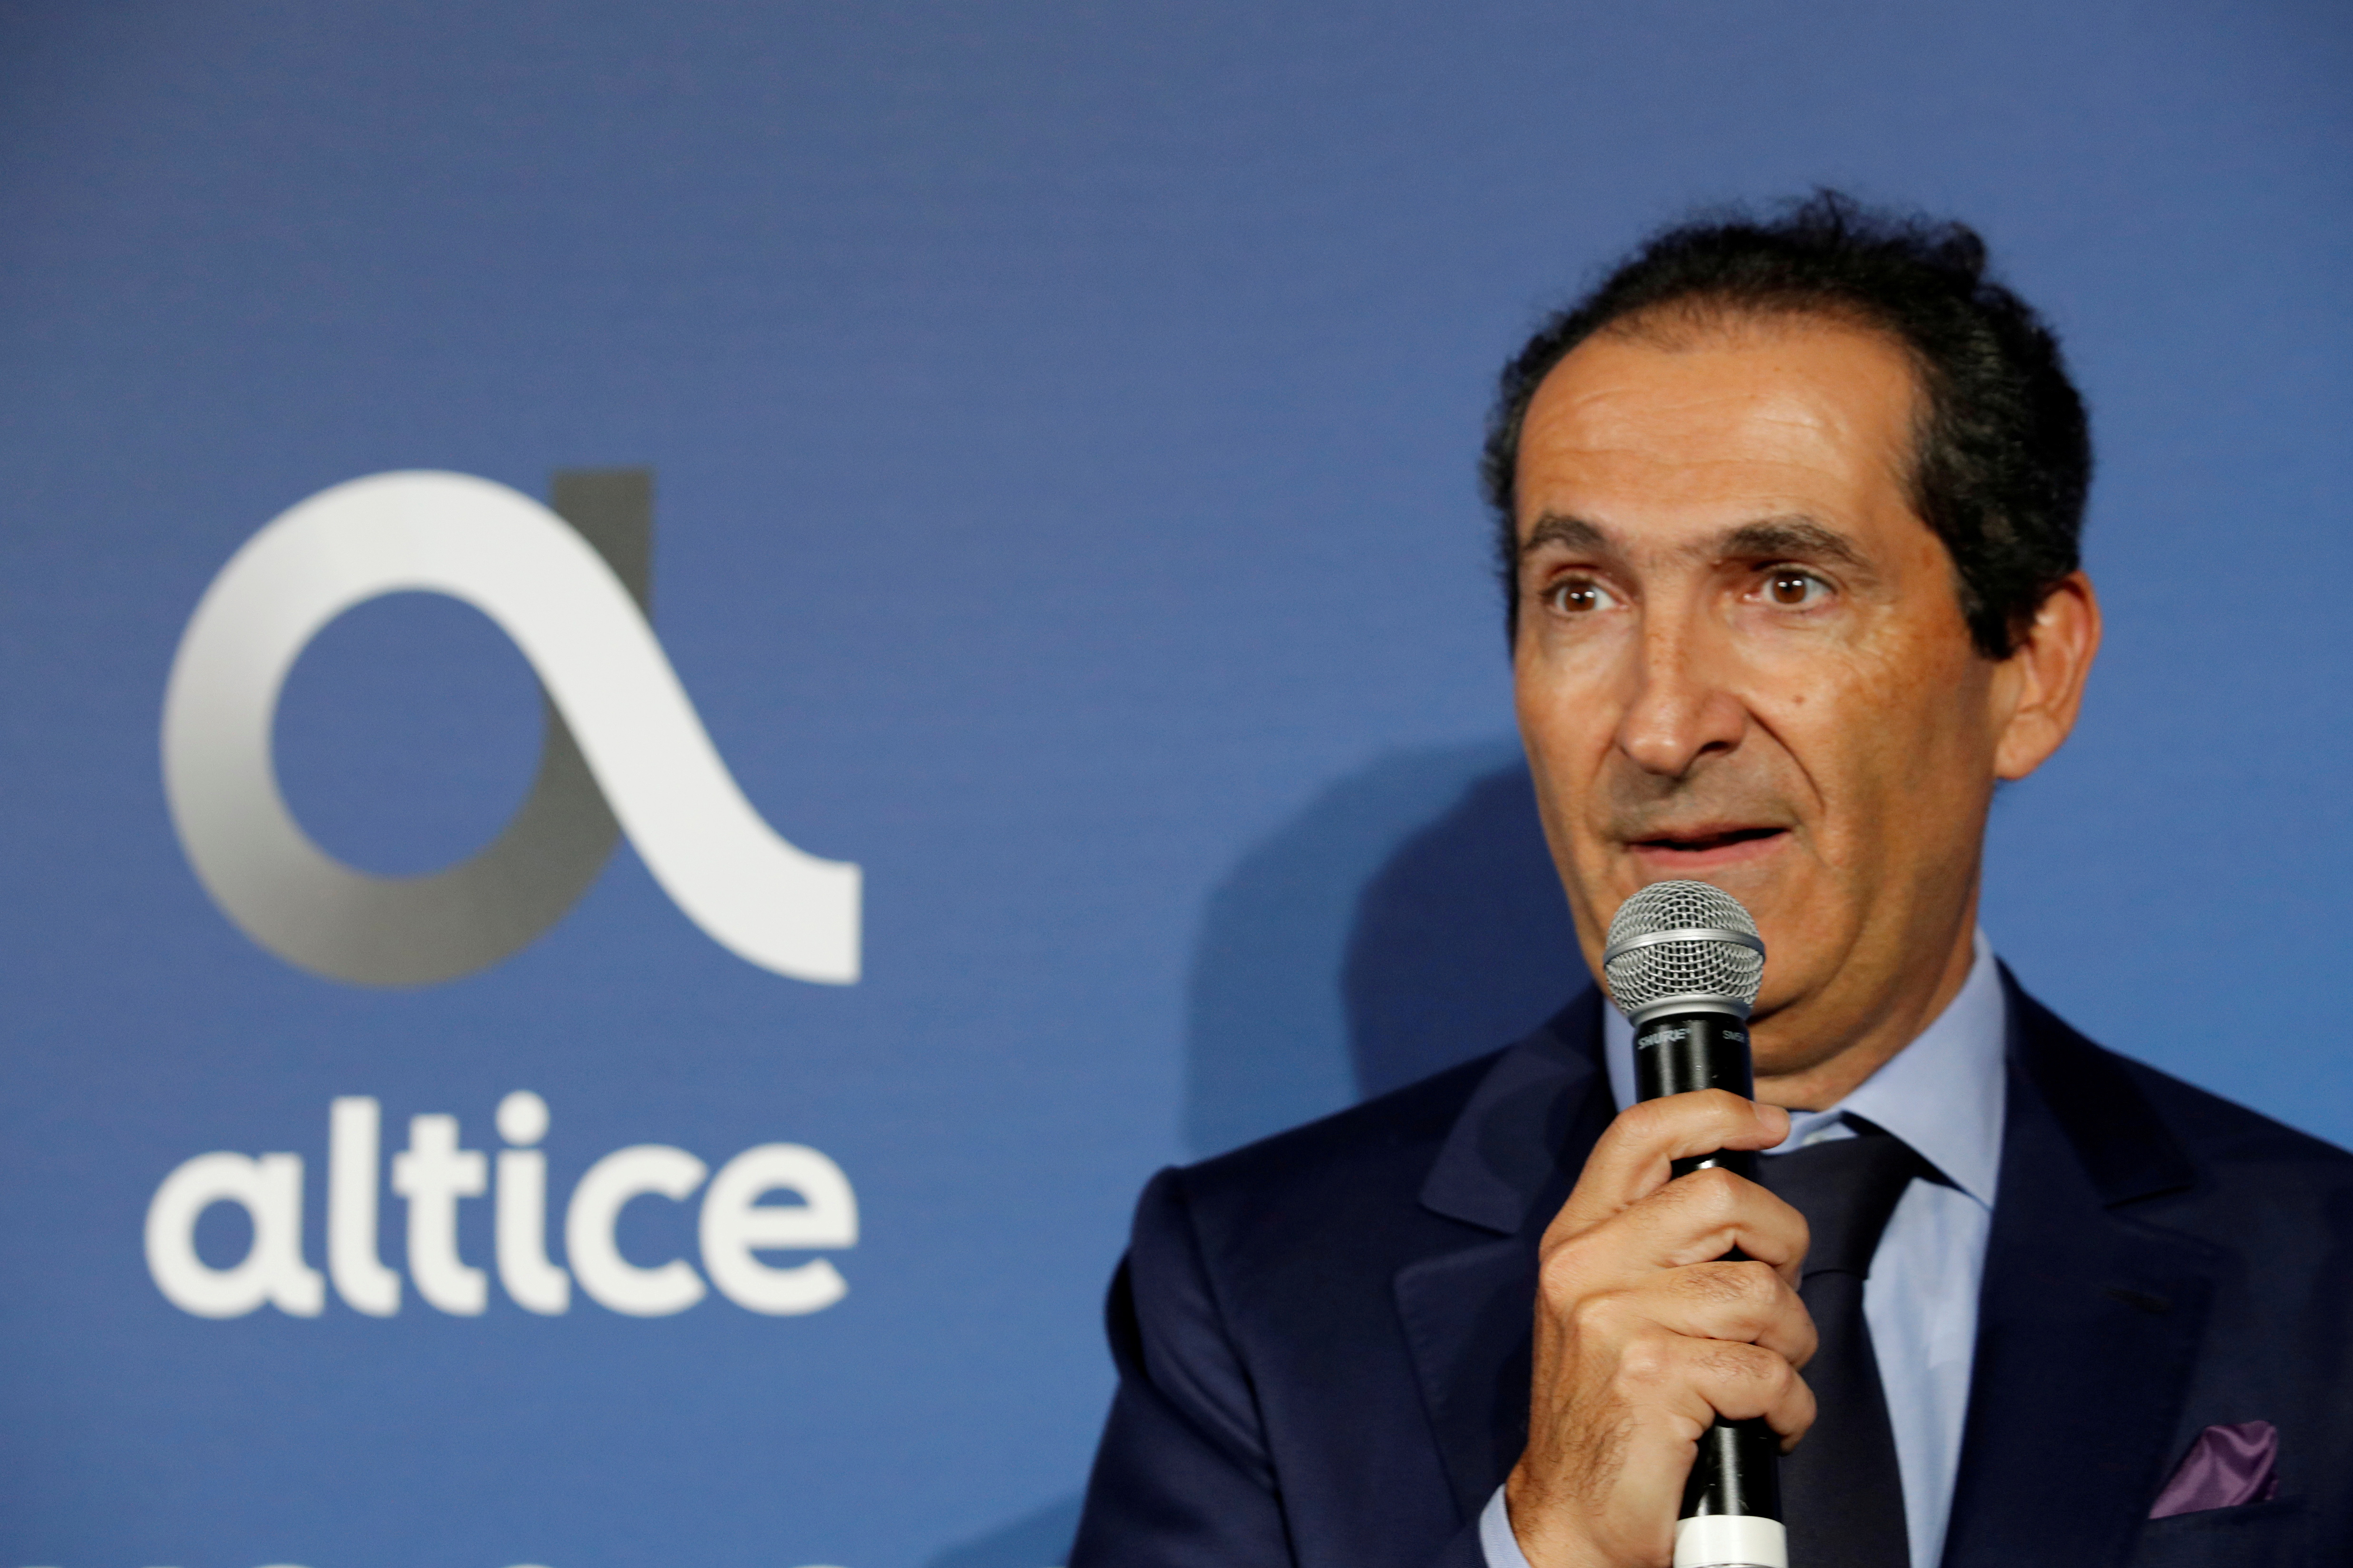 Patrick Drahi, Franco-Israeli businessman and founder of cable and mobile telecoms company Altice Group attends the inauguration of the Altice Campus in Paris, France, October 9, 2018.  REUTERS/Philippe Wojazer